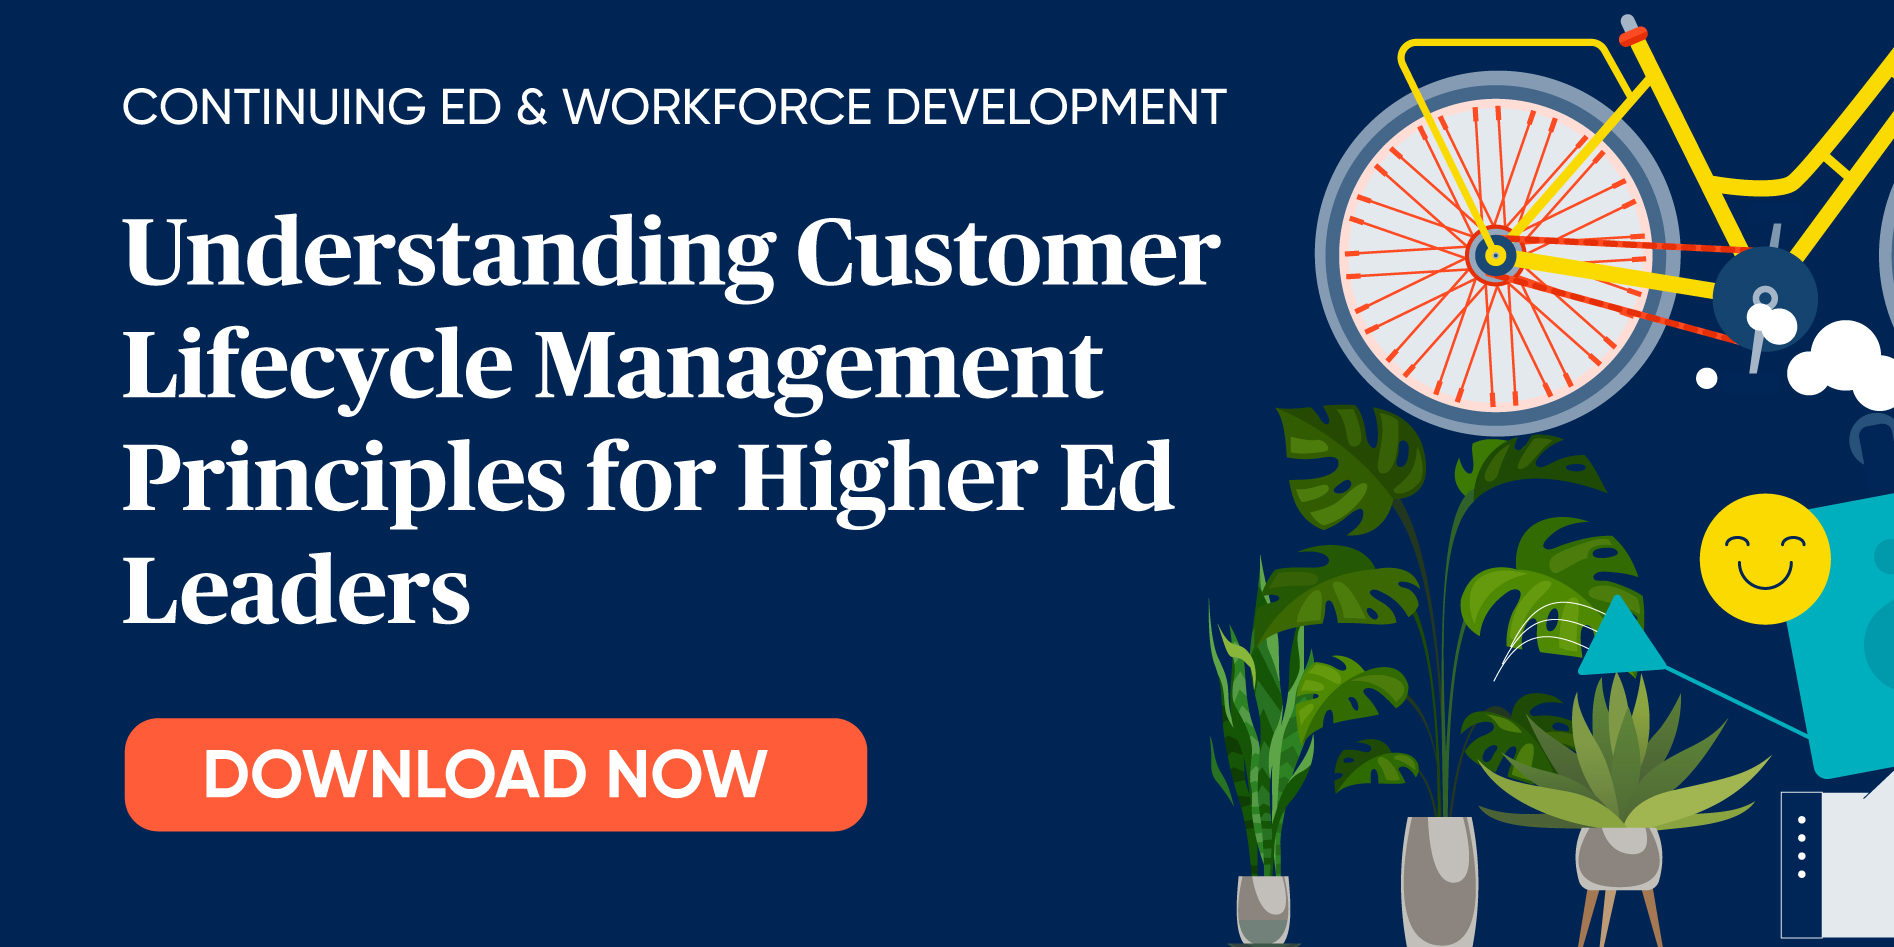 Understanding Customer Lifecycle Management Principles for Higher Ed Leaders